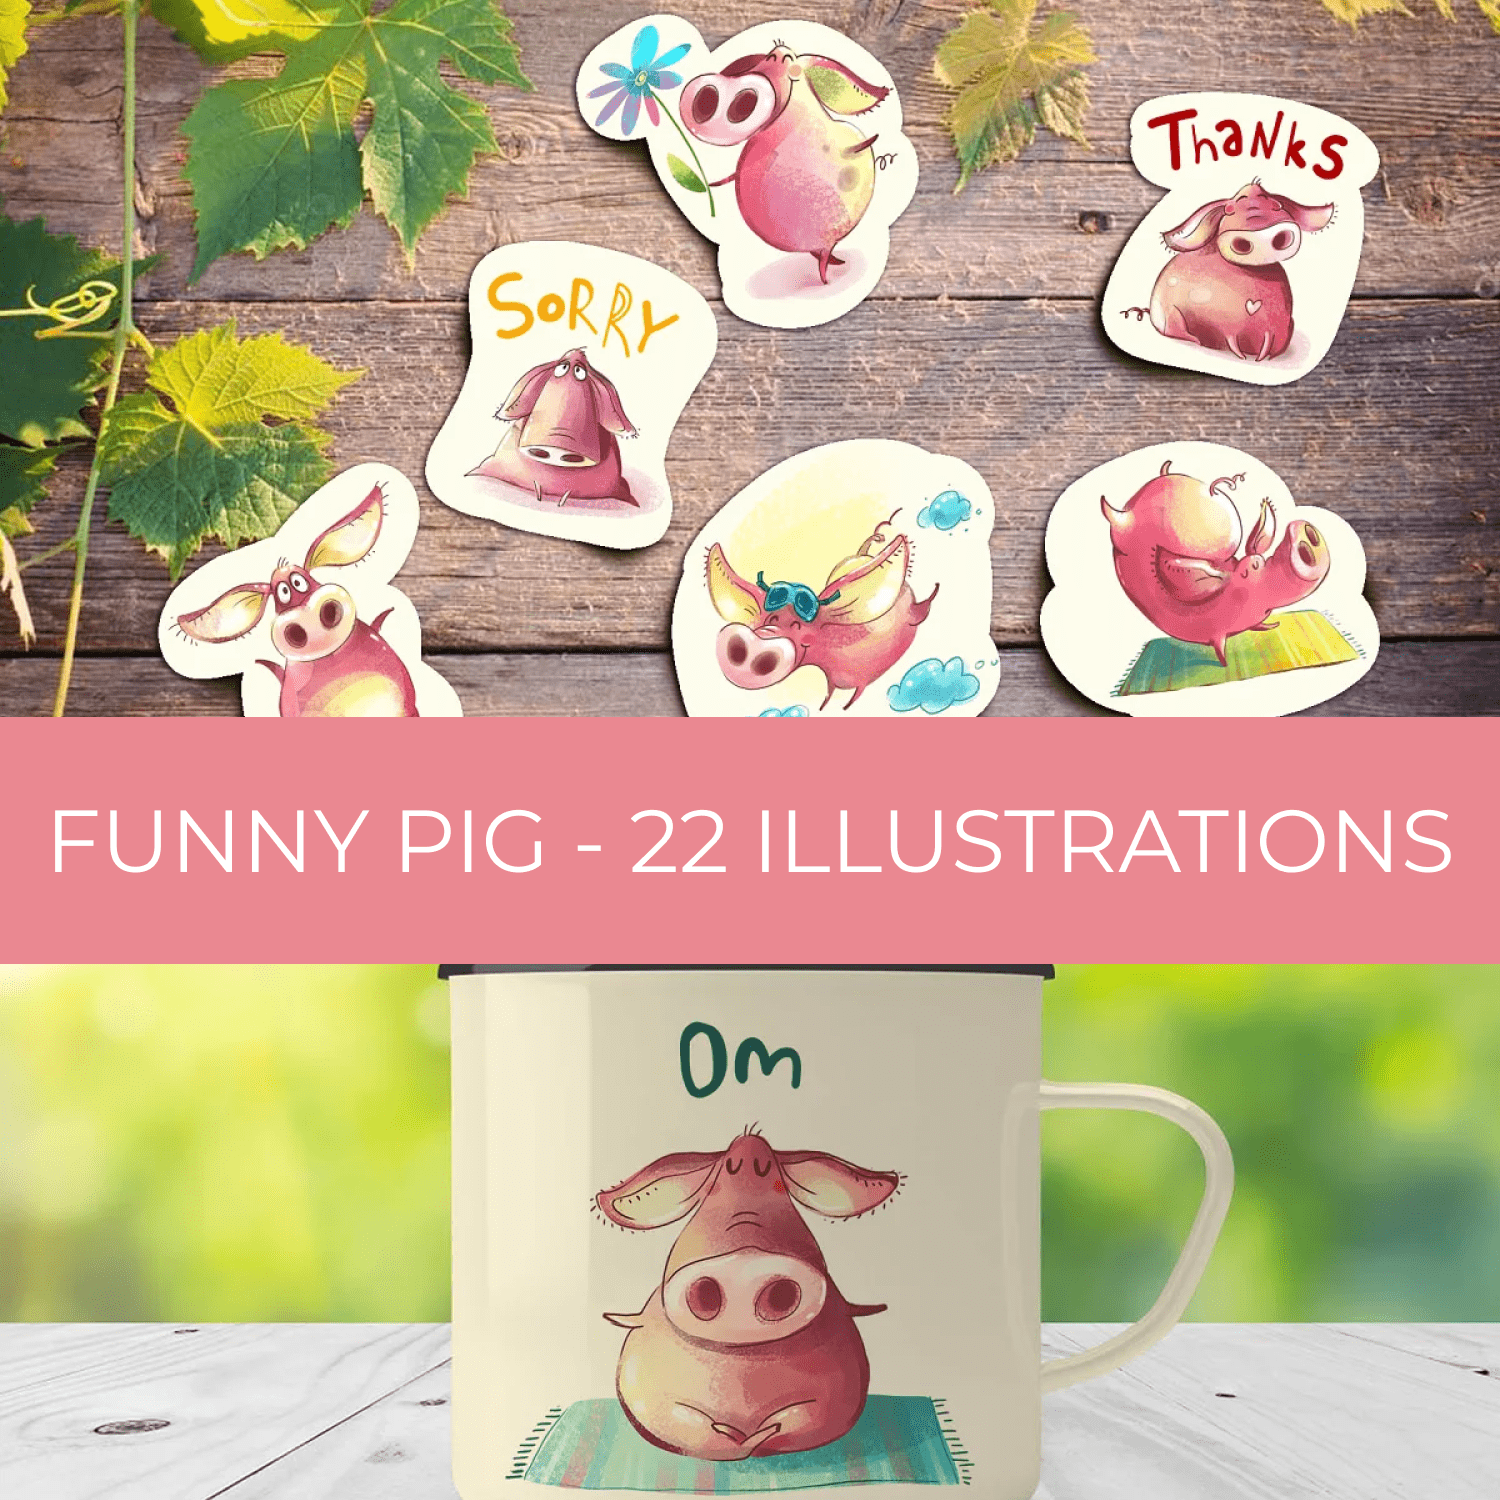 Funny Pig - 22 illustrations cover.